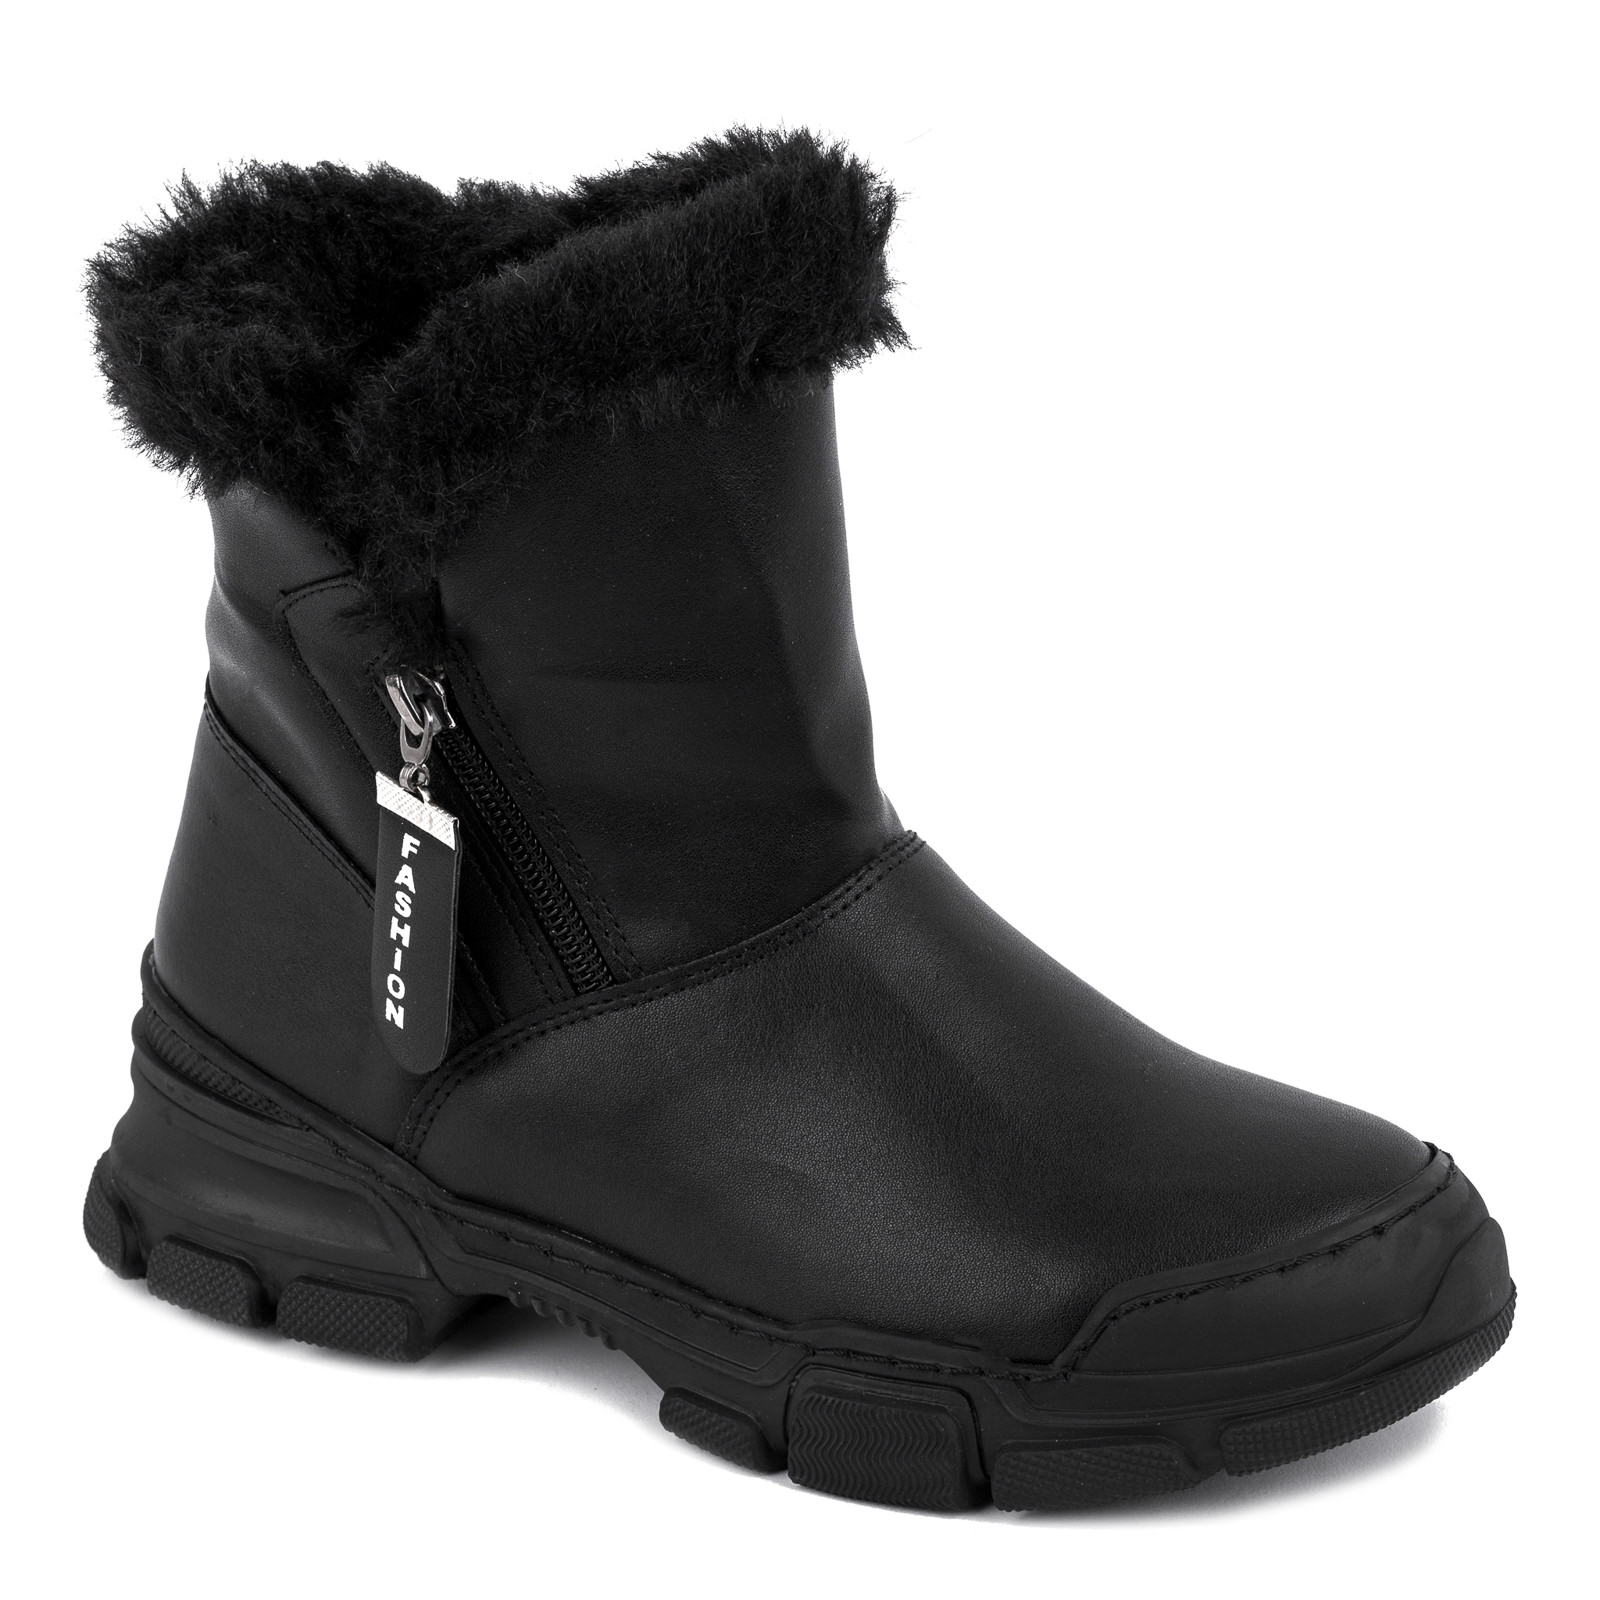 SNOW BOOTS WITH FUR AND ZIPPER - BLACK